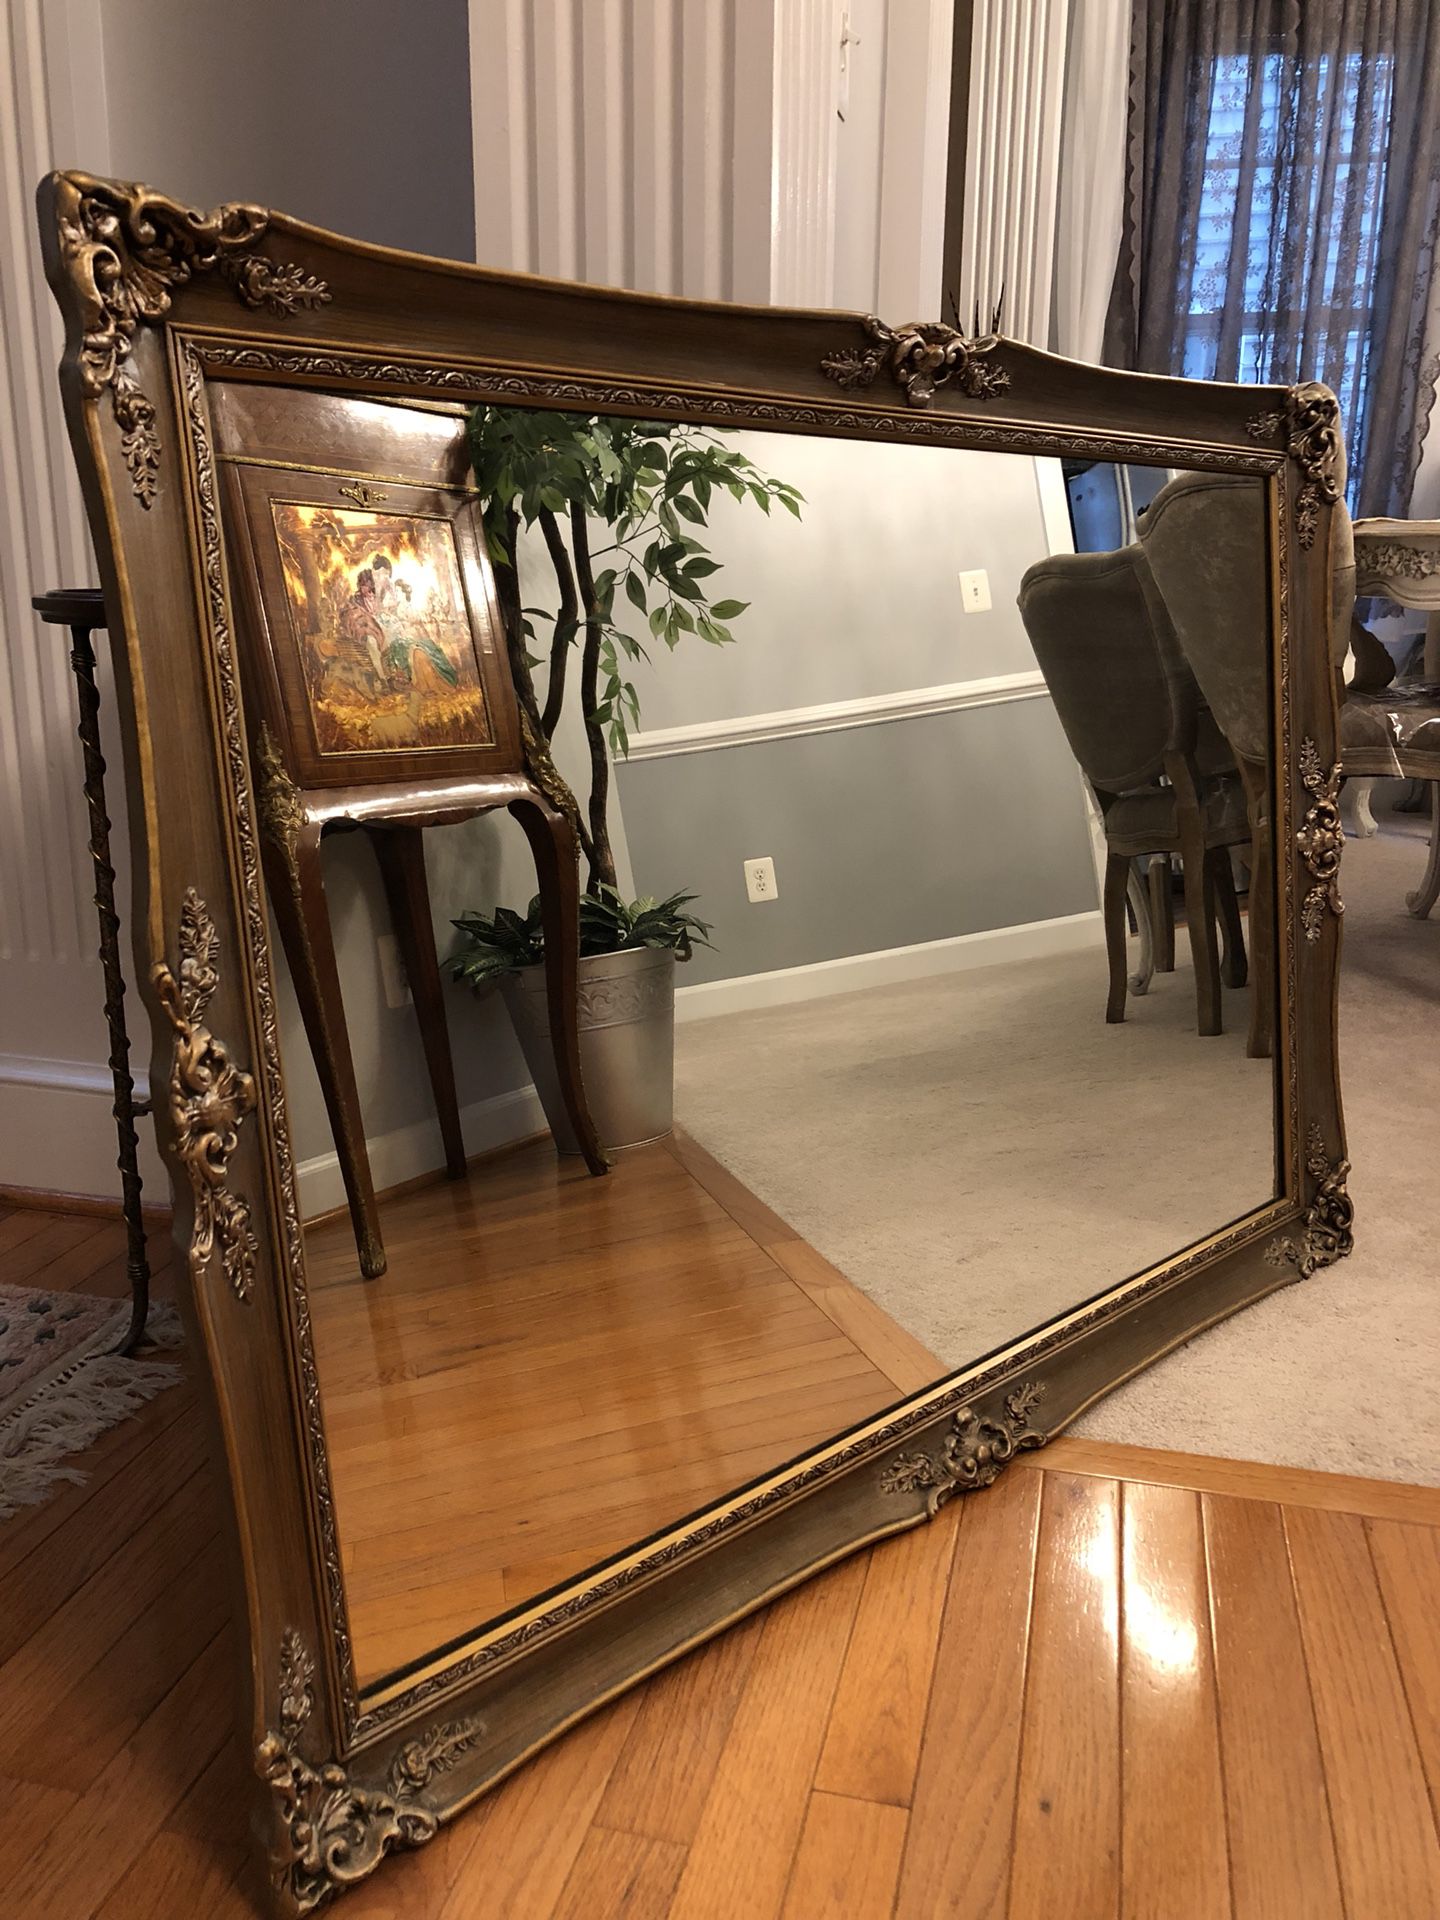 47”X33 large Antique french wood oxide mirror